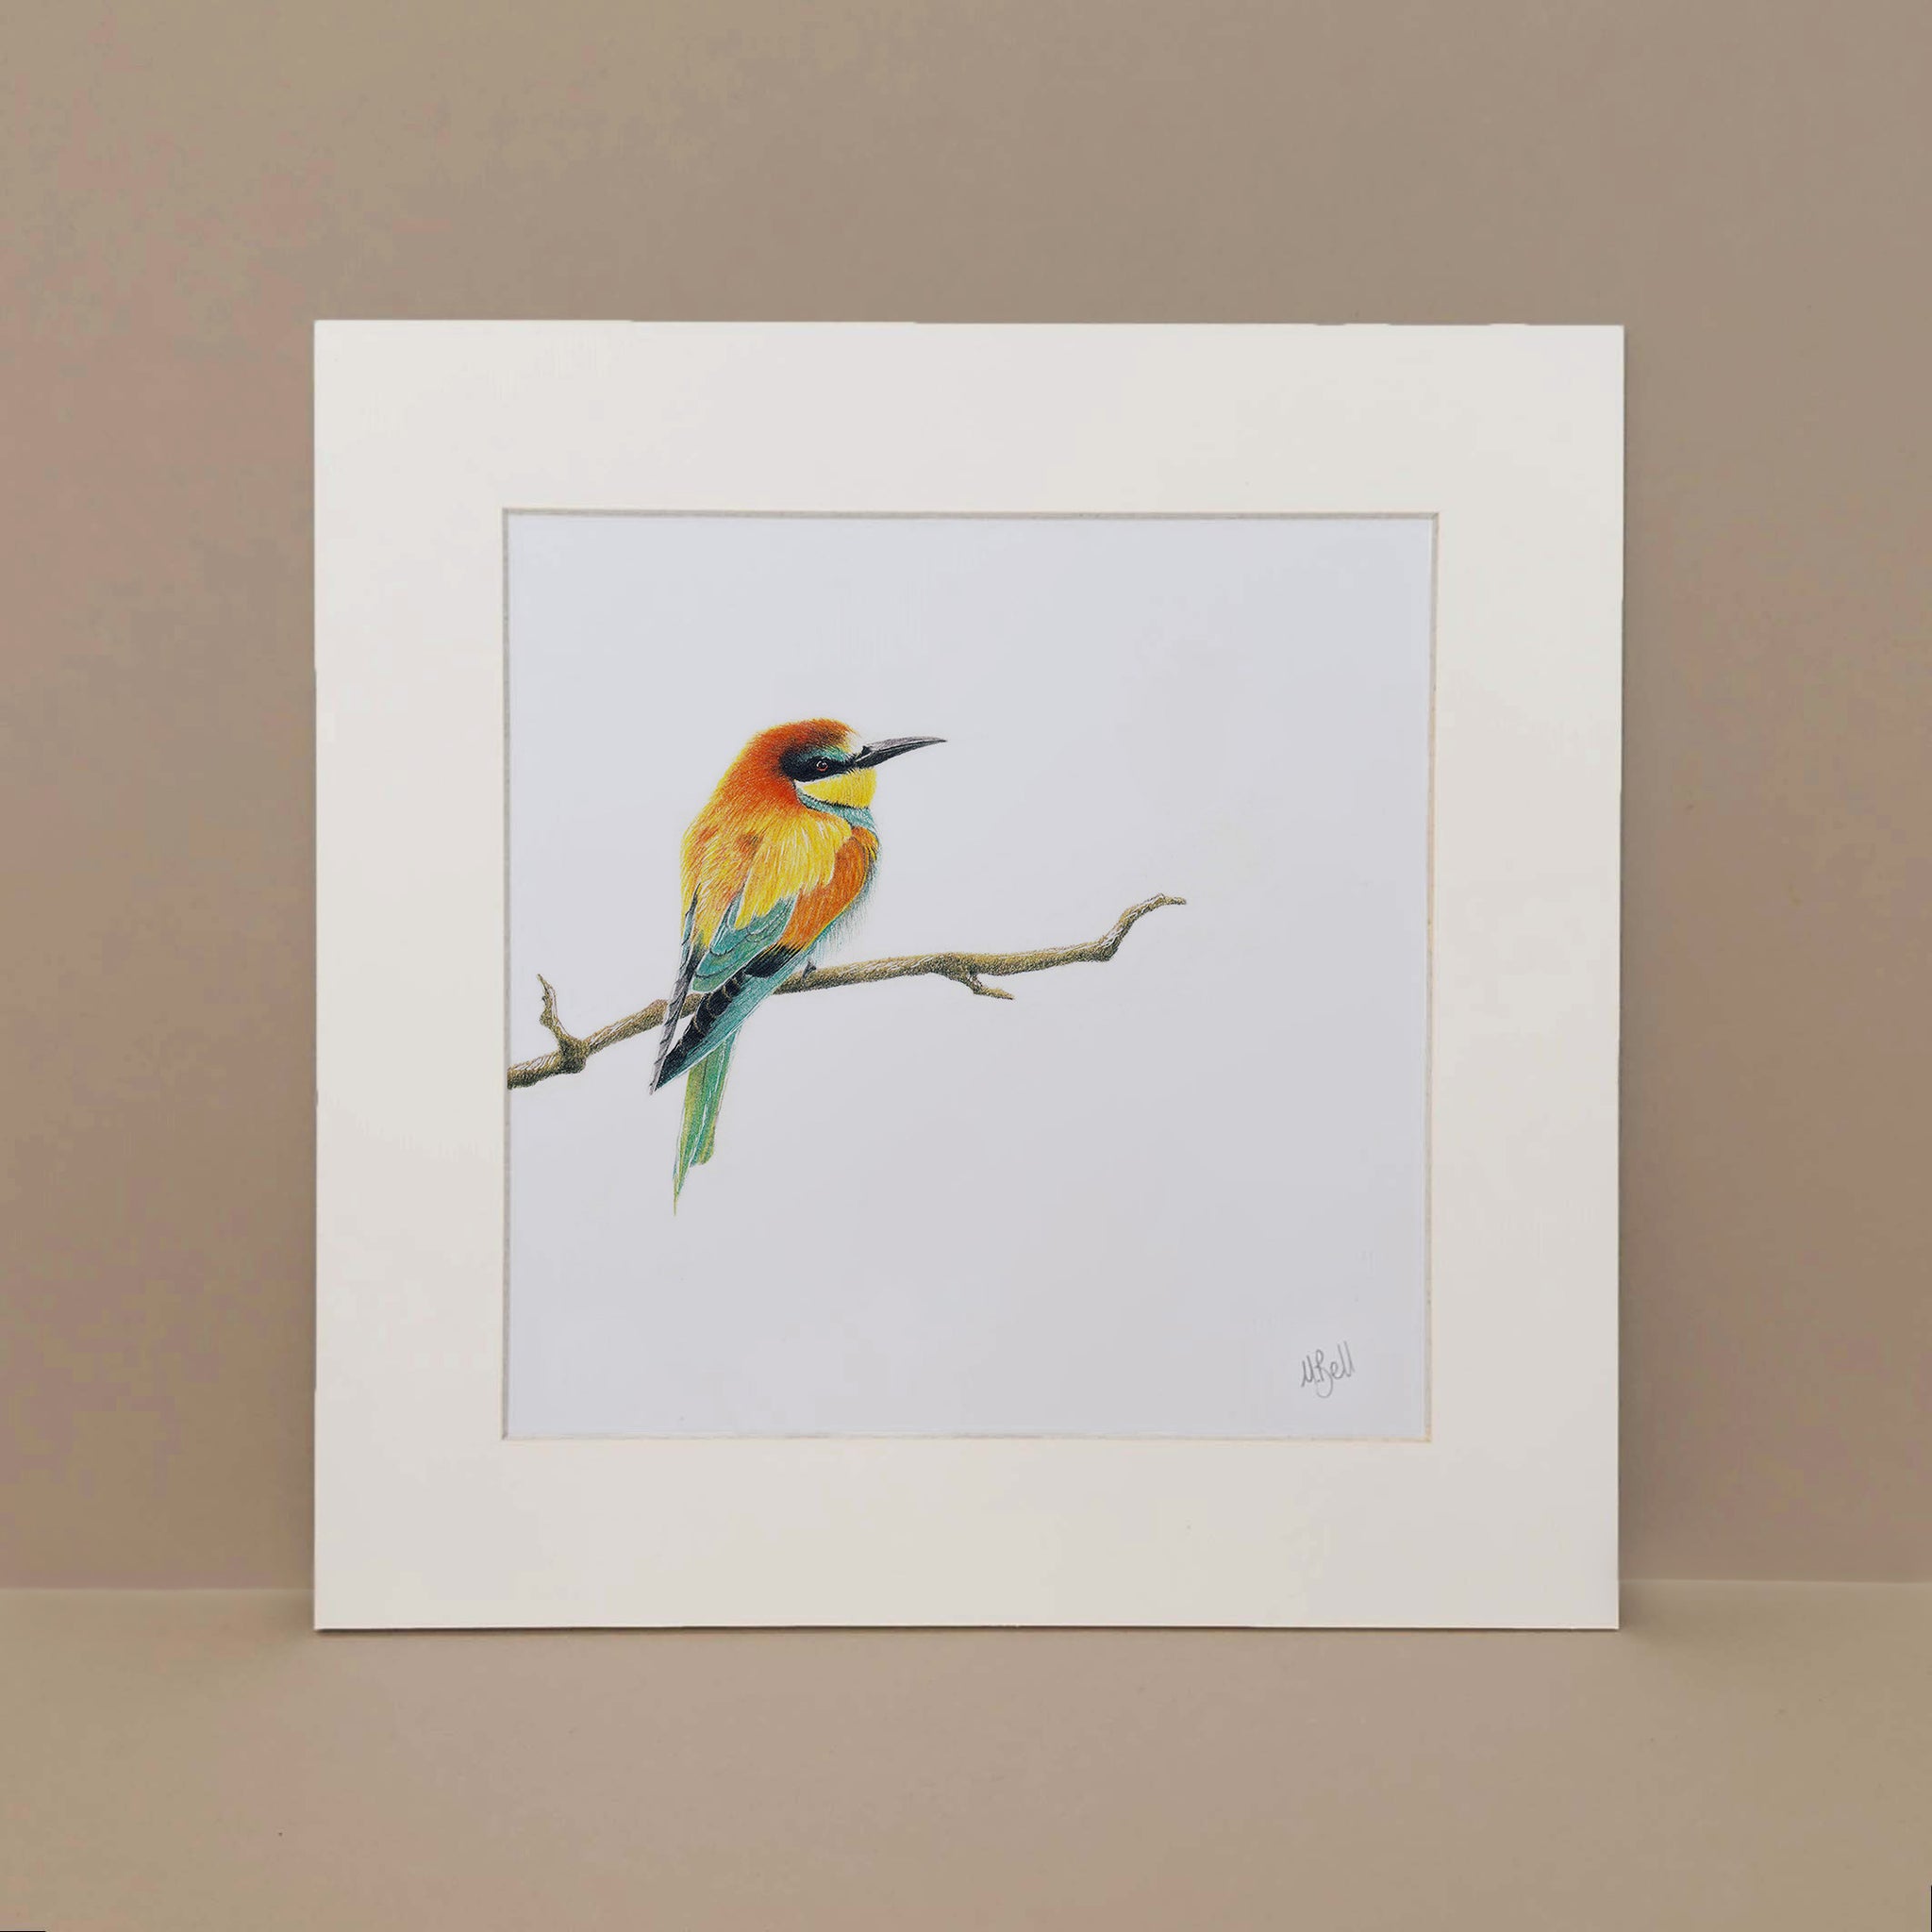 European Bee Eater perched on a branch artwork